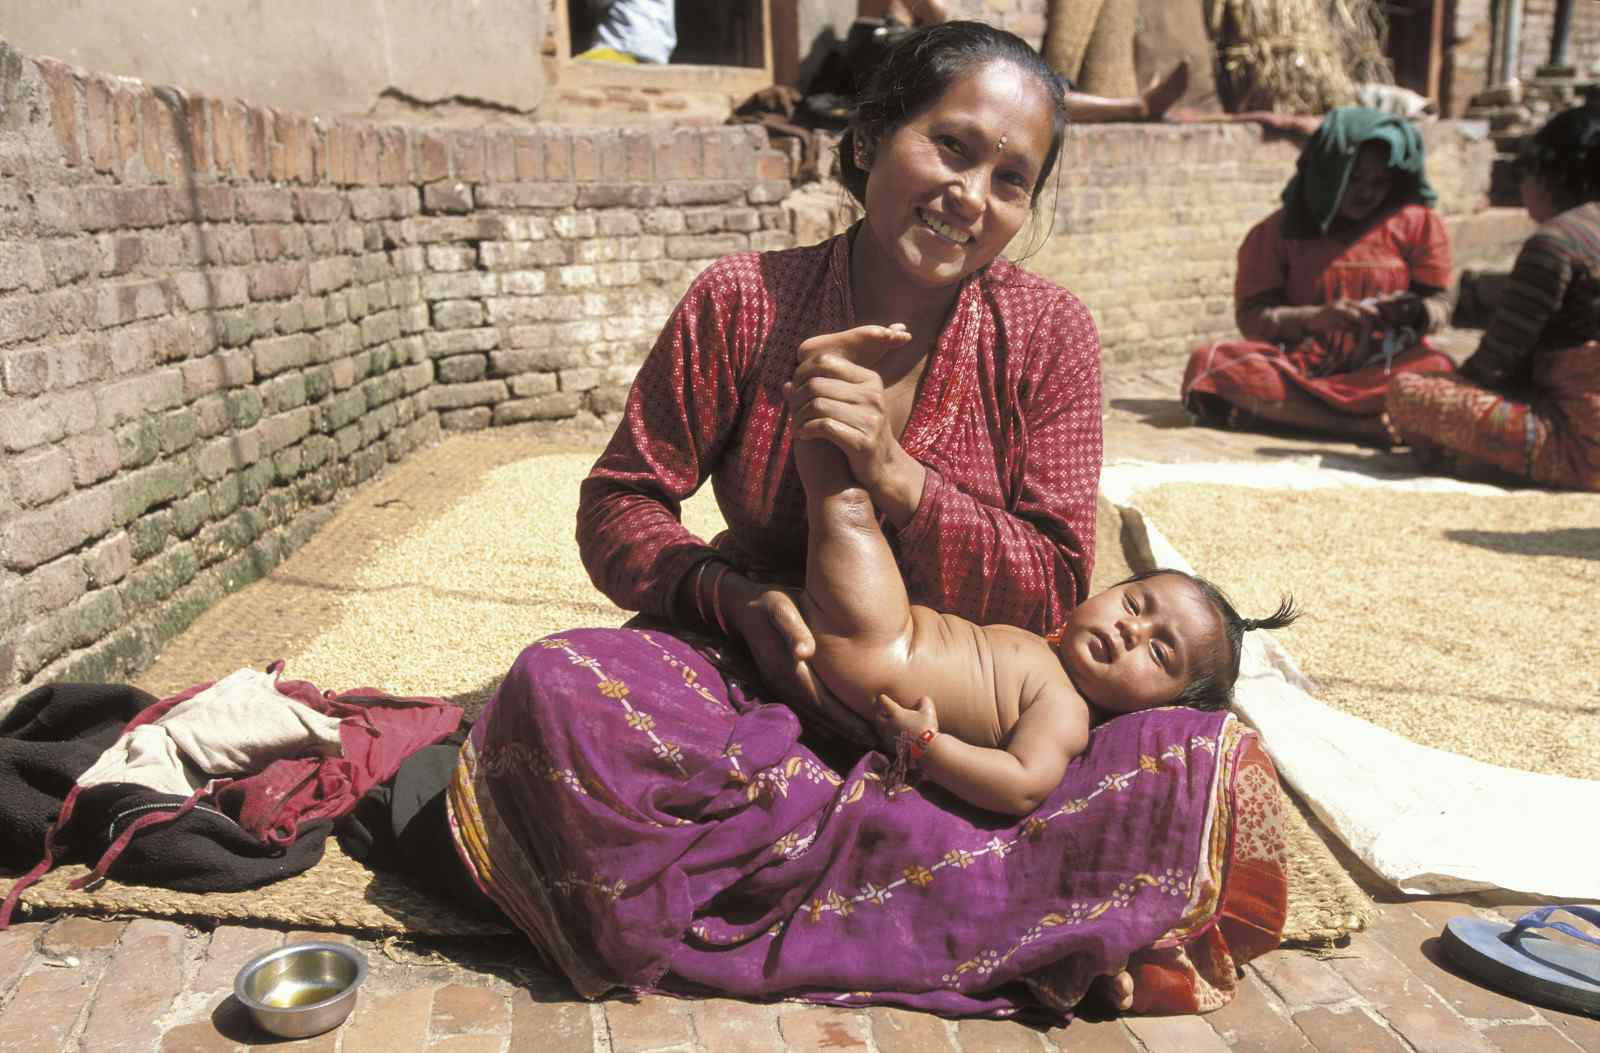 Woman massaging her baby with oil, picture taken in Nepal (BSIP/Universal Images Group via Getty Images)